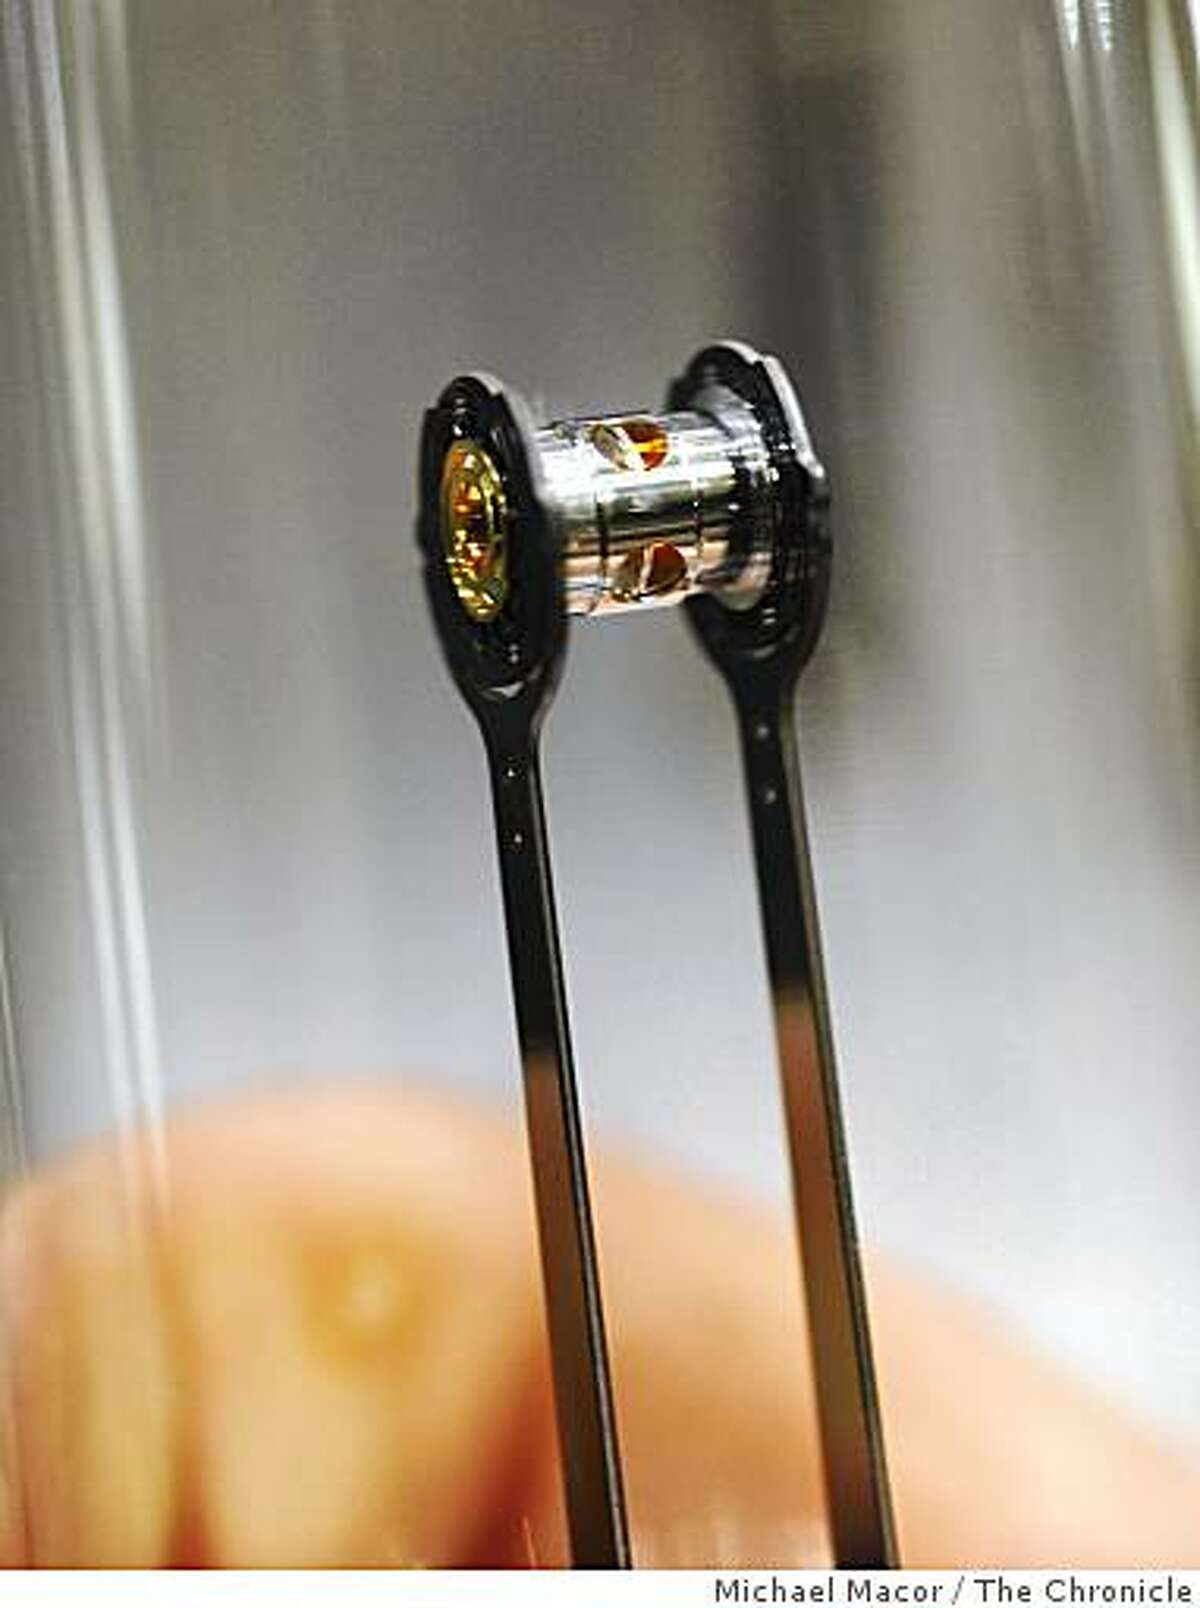 The small gold container the size of a pencil eraser is the focus of 192 laser beams, after being placed inside the target chamber. The Lawrence Livermore National Laboratory dedicates the National Ignition facility in Livermore, Calif. on Friday May 29, 2009.